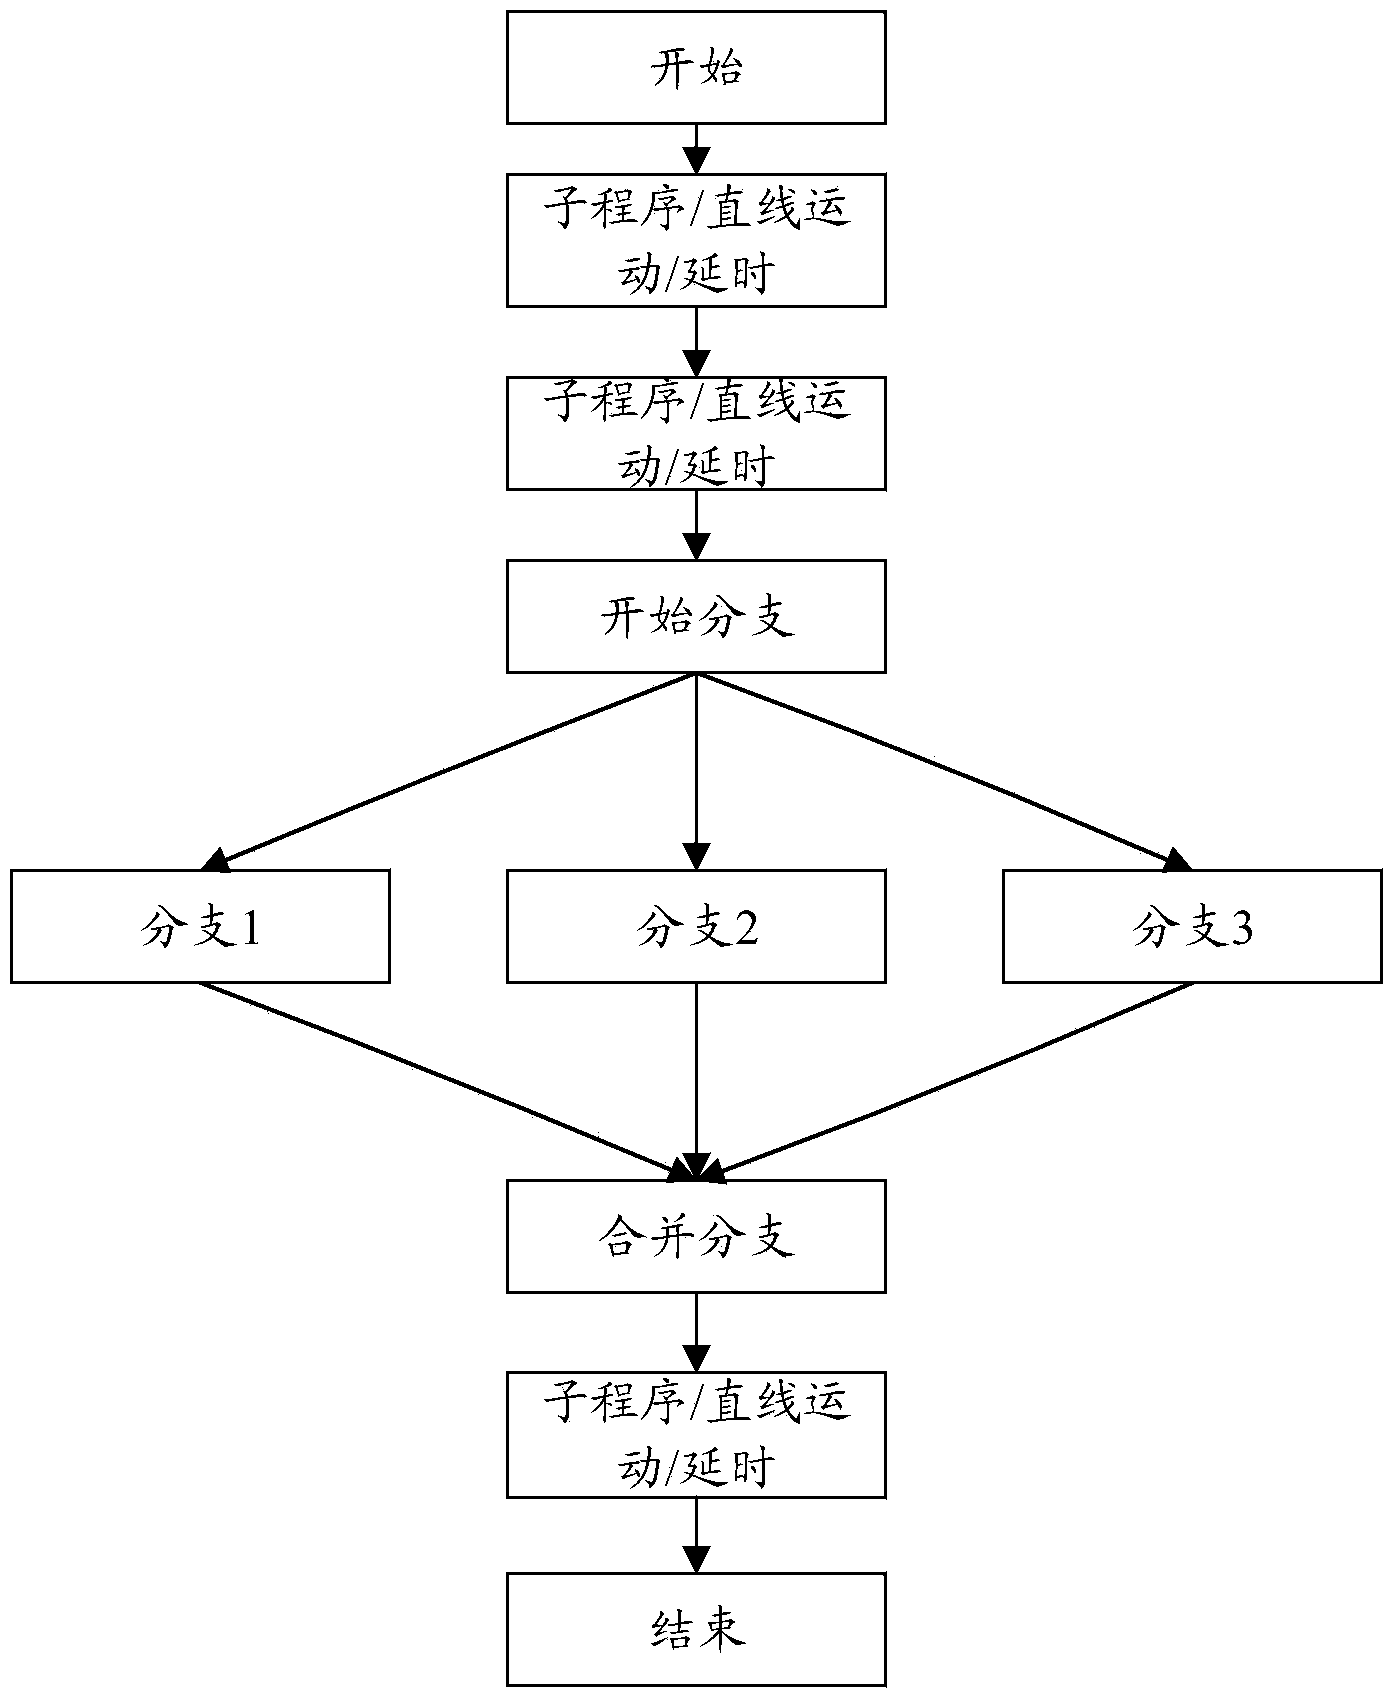 Method for achieving motion control multi-branch synchronous execution based on teaching instructions